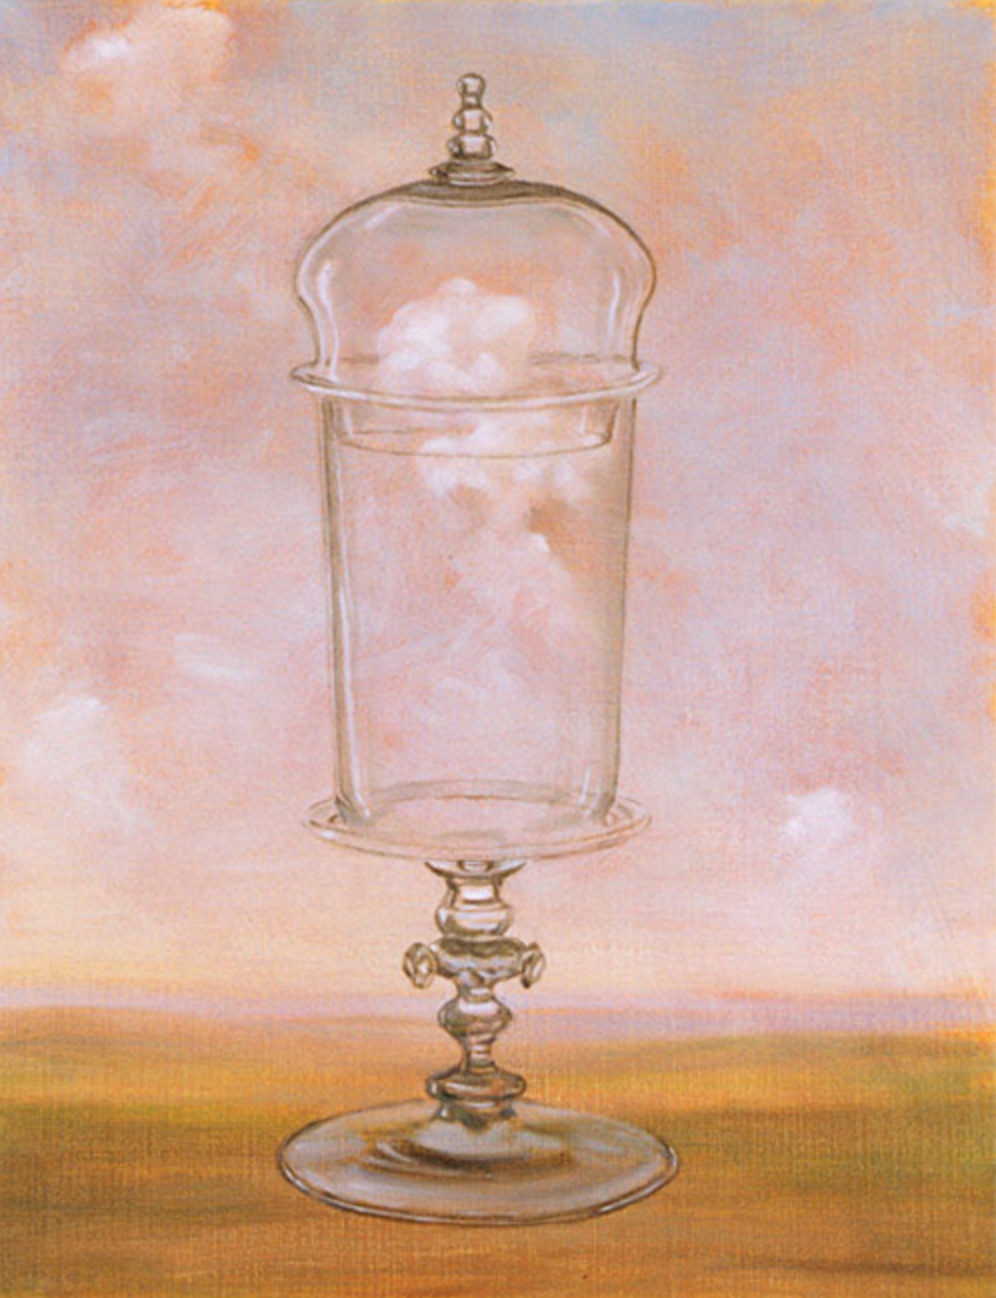   Glass with Lid , 2004 25 x 20cm oil on linen 